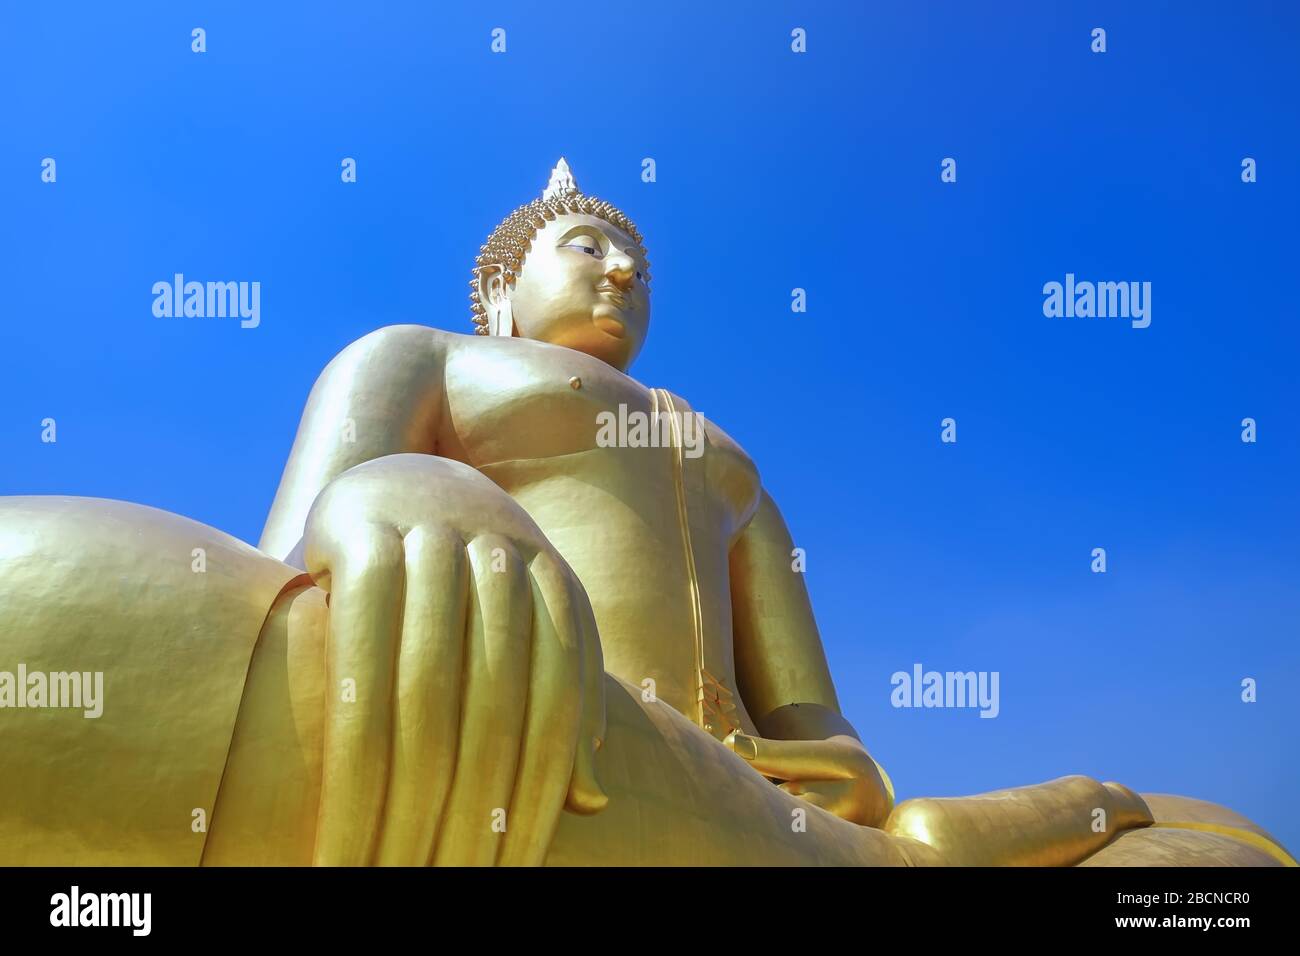 The largest Buddha statue in the world at Wat Muang, Ang Thong province, Thailand. Stock Photo